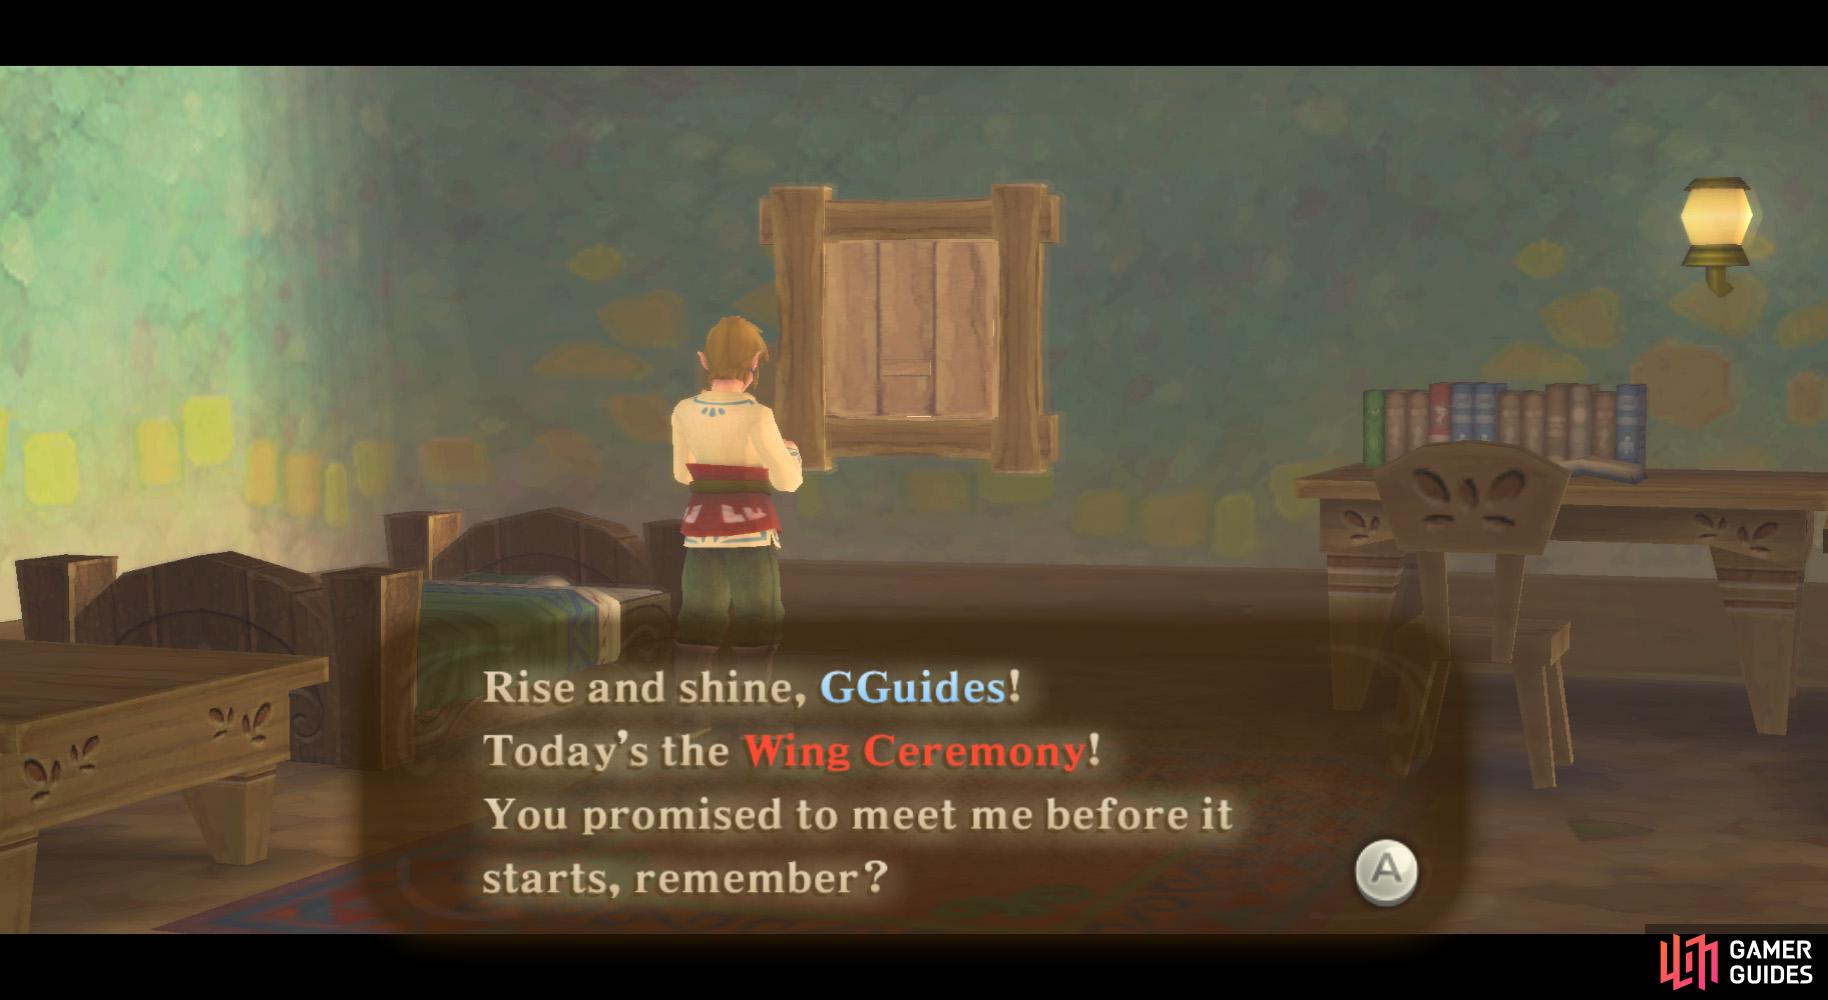 Its a reminder to meet Zelda for the Wing Ceremony!